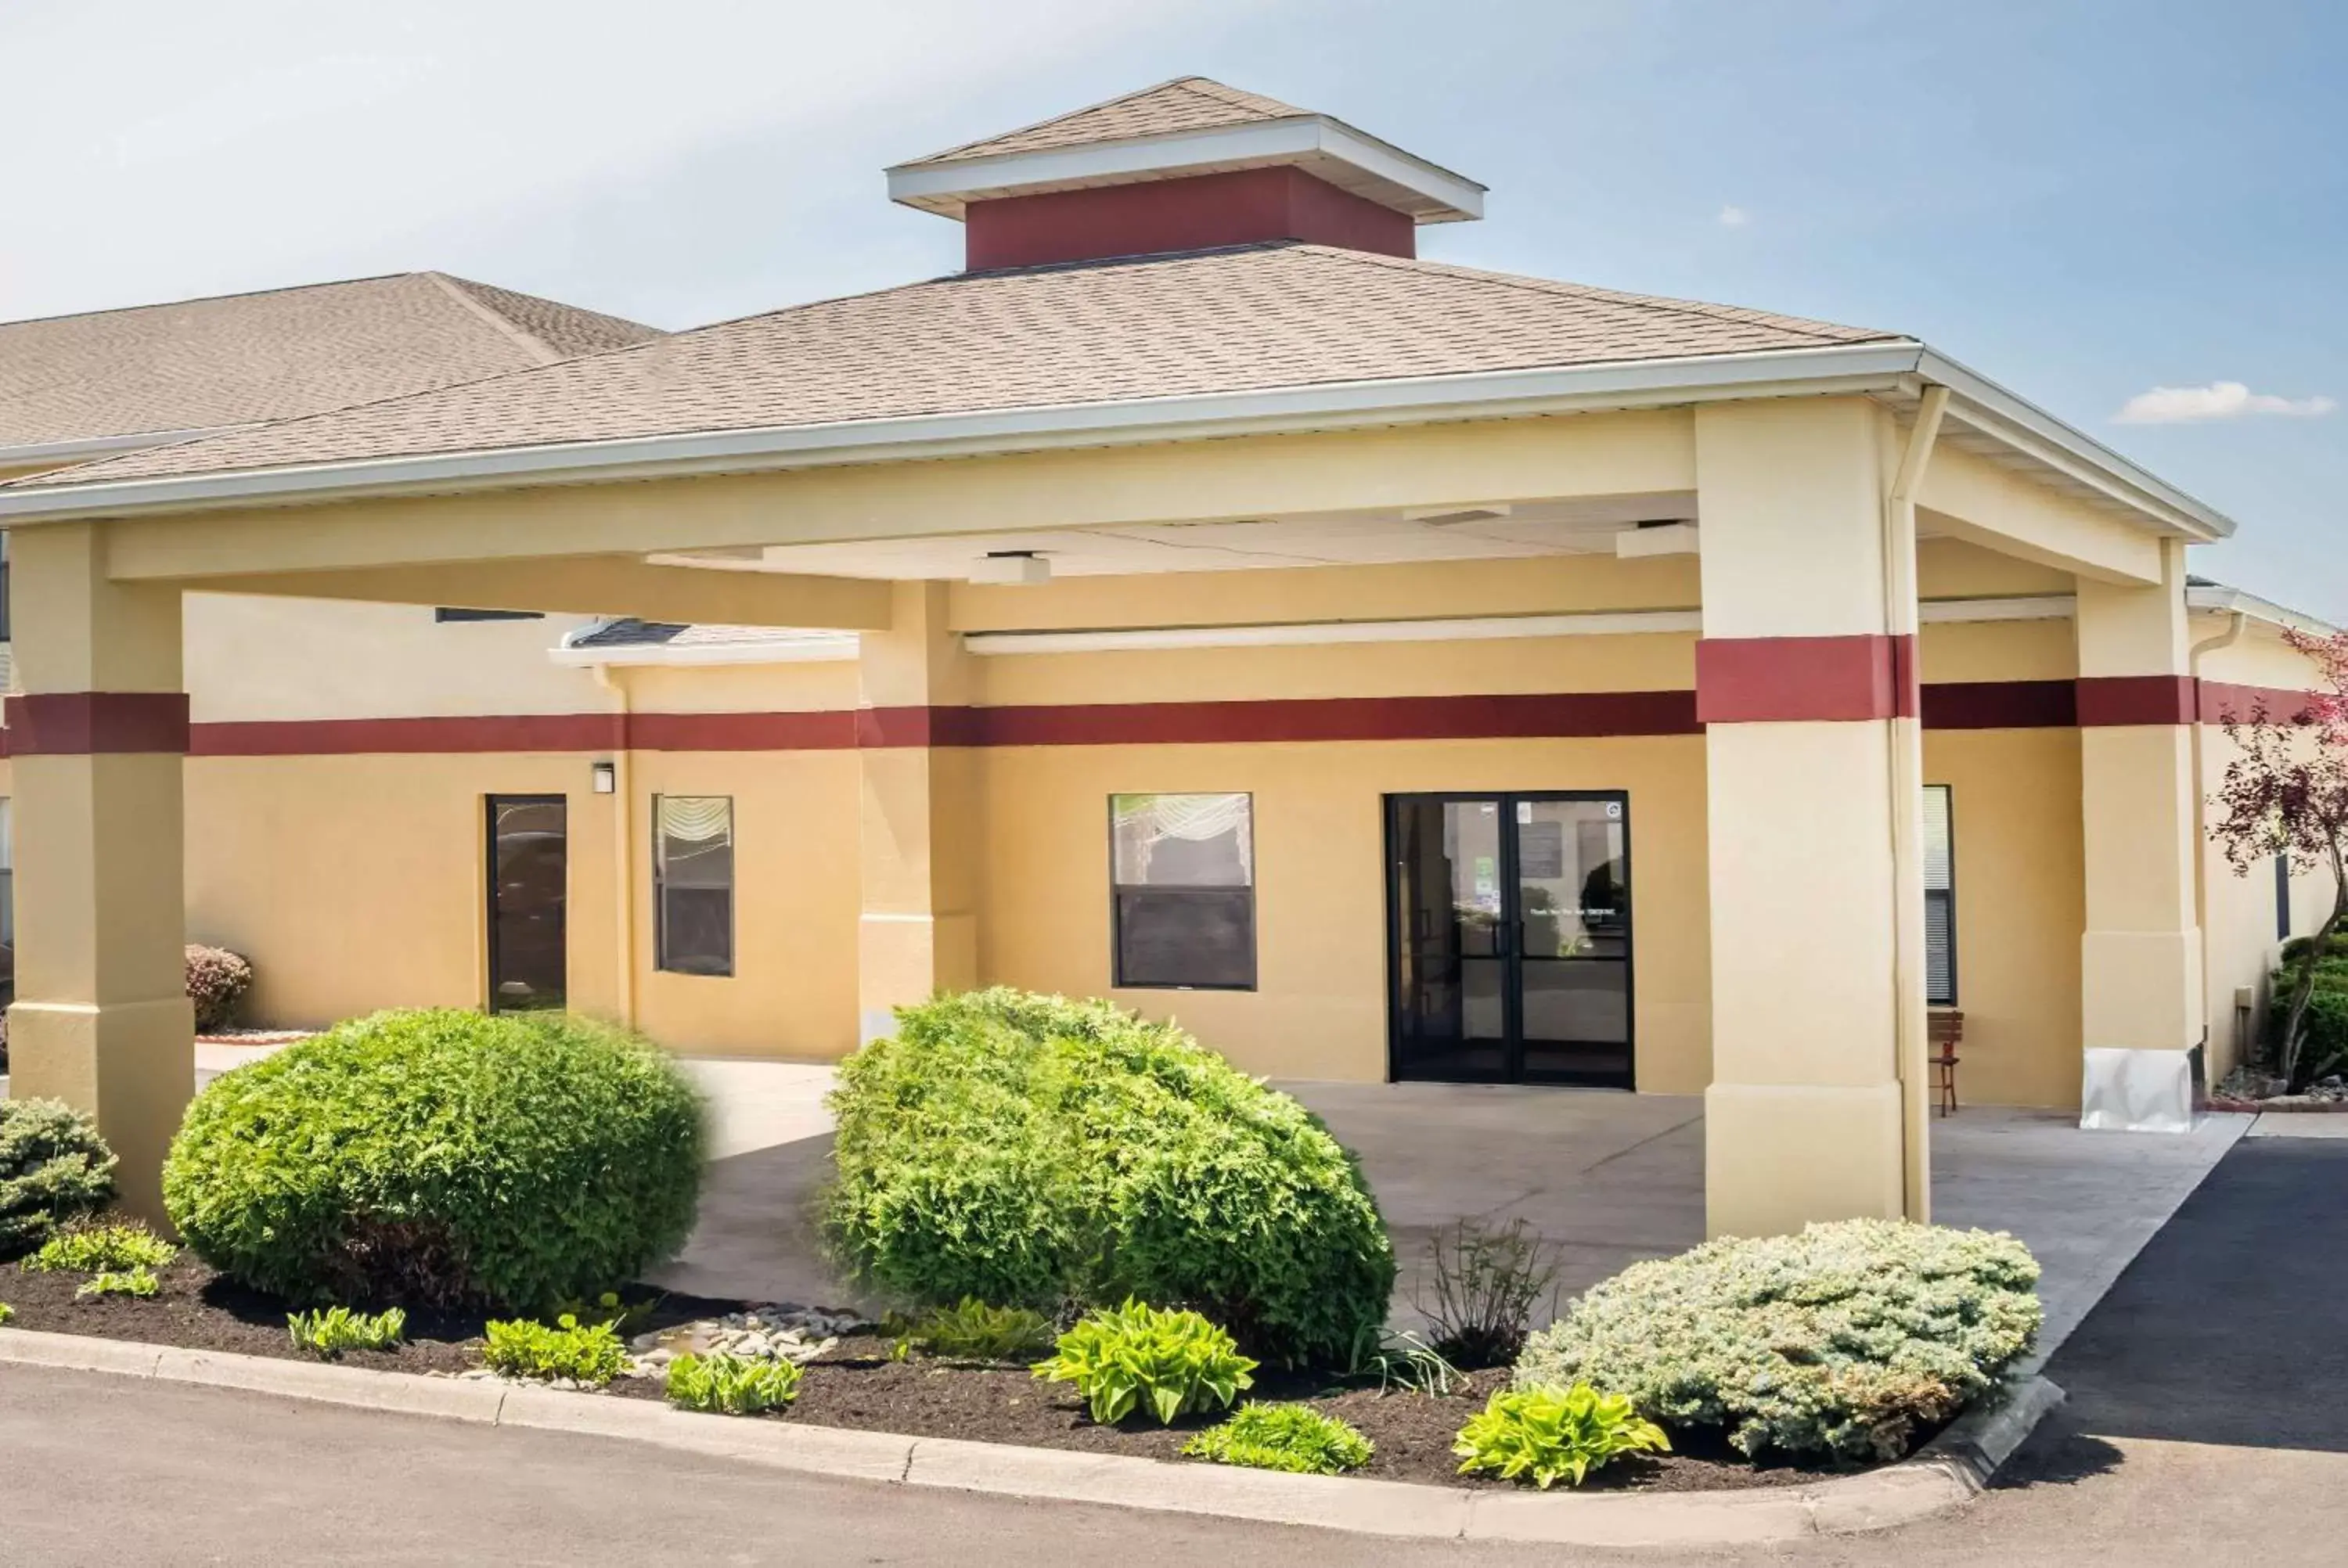 Property Building in Super 8 by Wyndham Bellefontaine